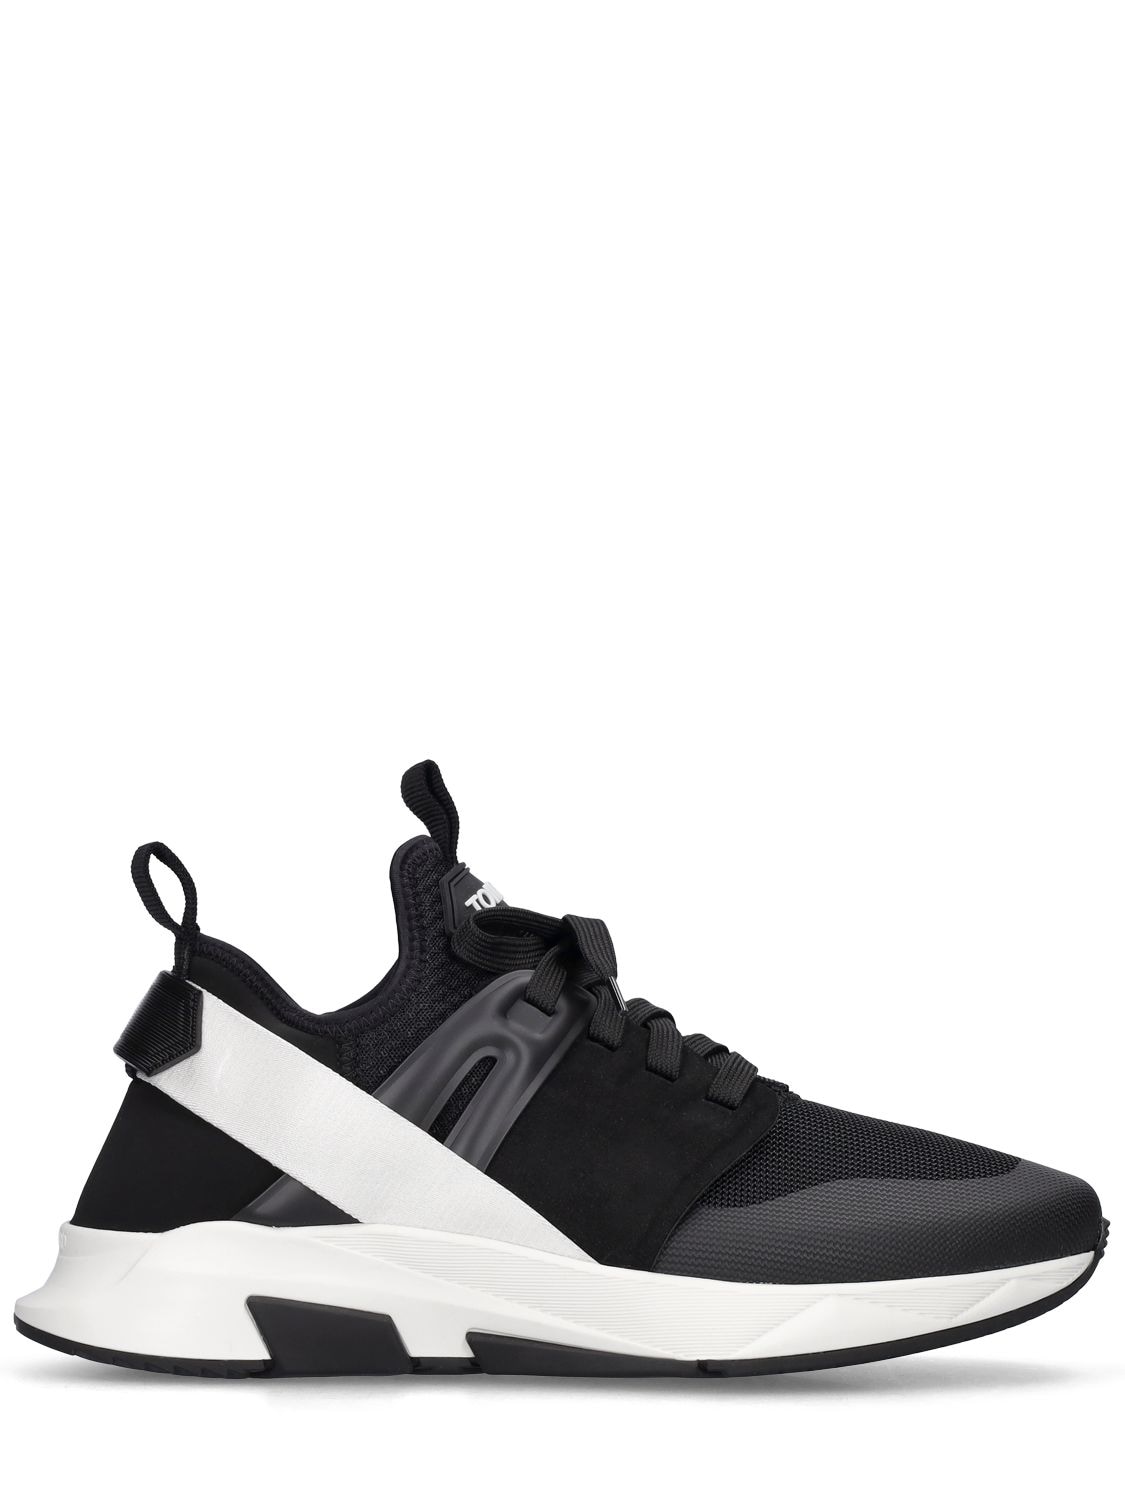 Tom Ford Alcantara + Neoprene + Lycra + Smooth Leather Low Top Trainers In Black